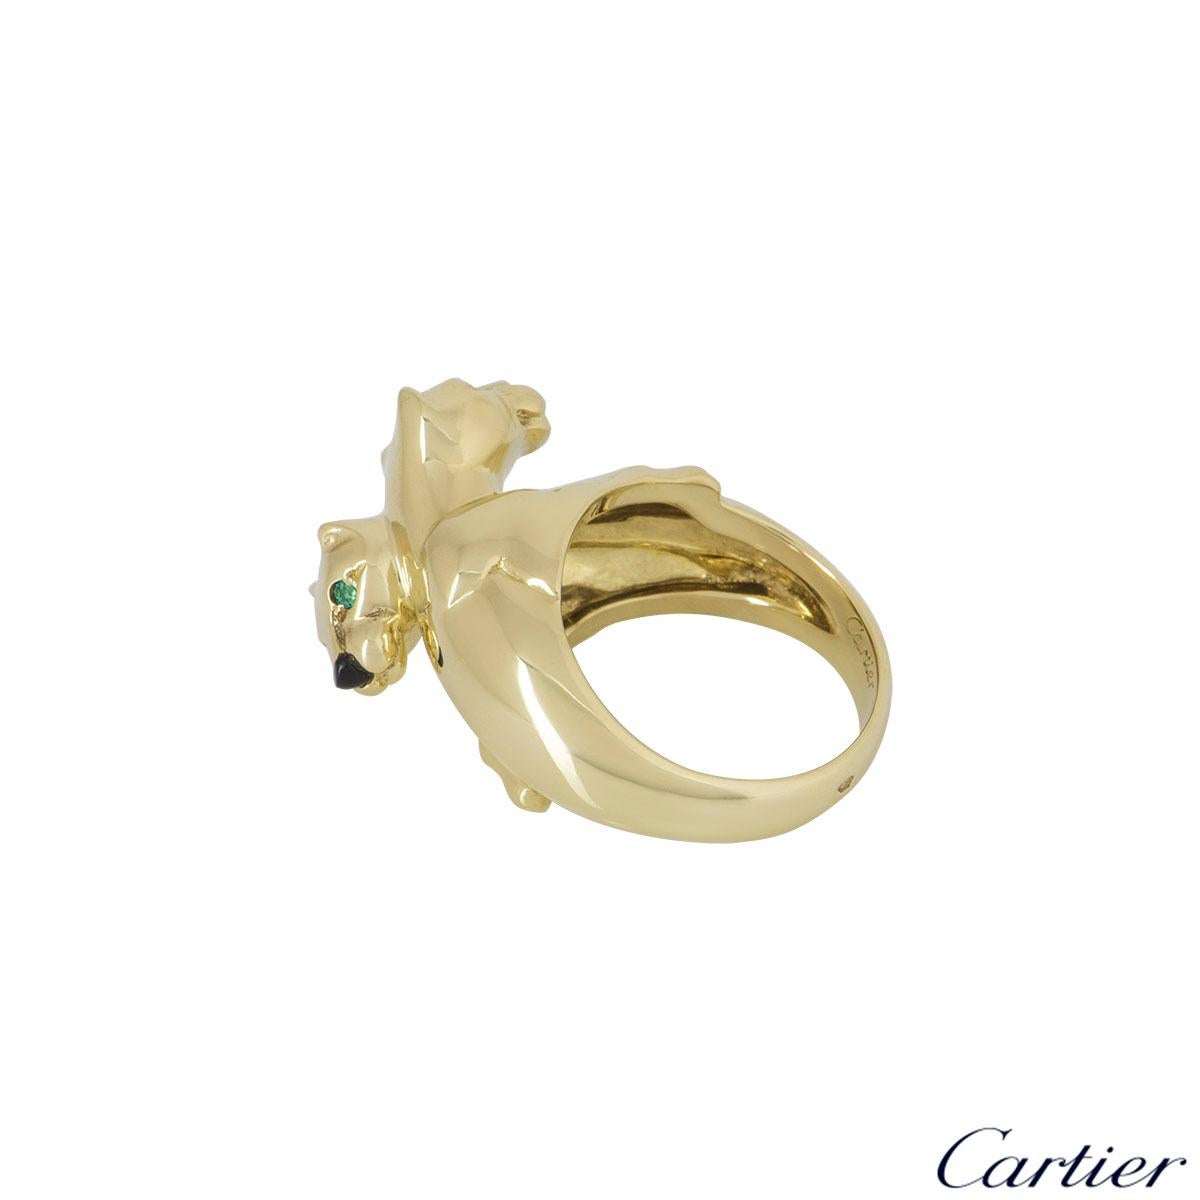 Cartier Double Panthere De Cartier Yellow Gold, Emerald and Onyx Ring 1